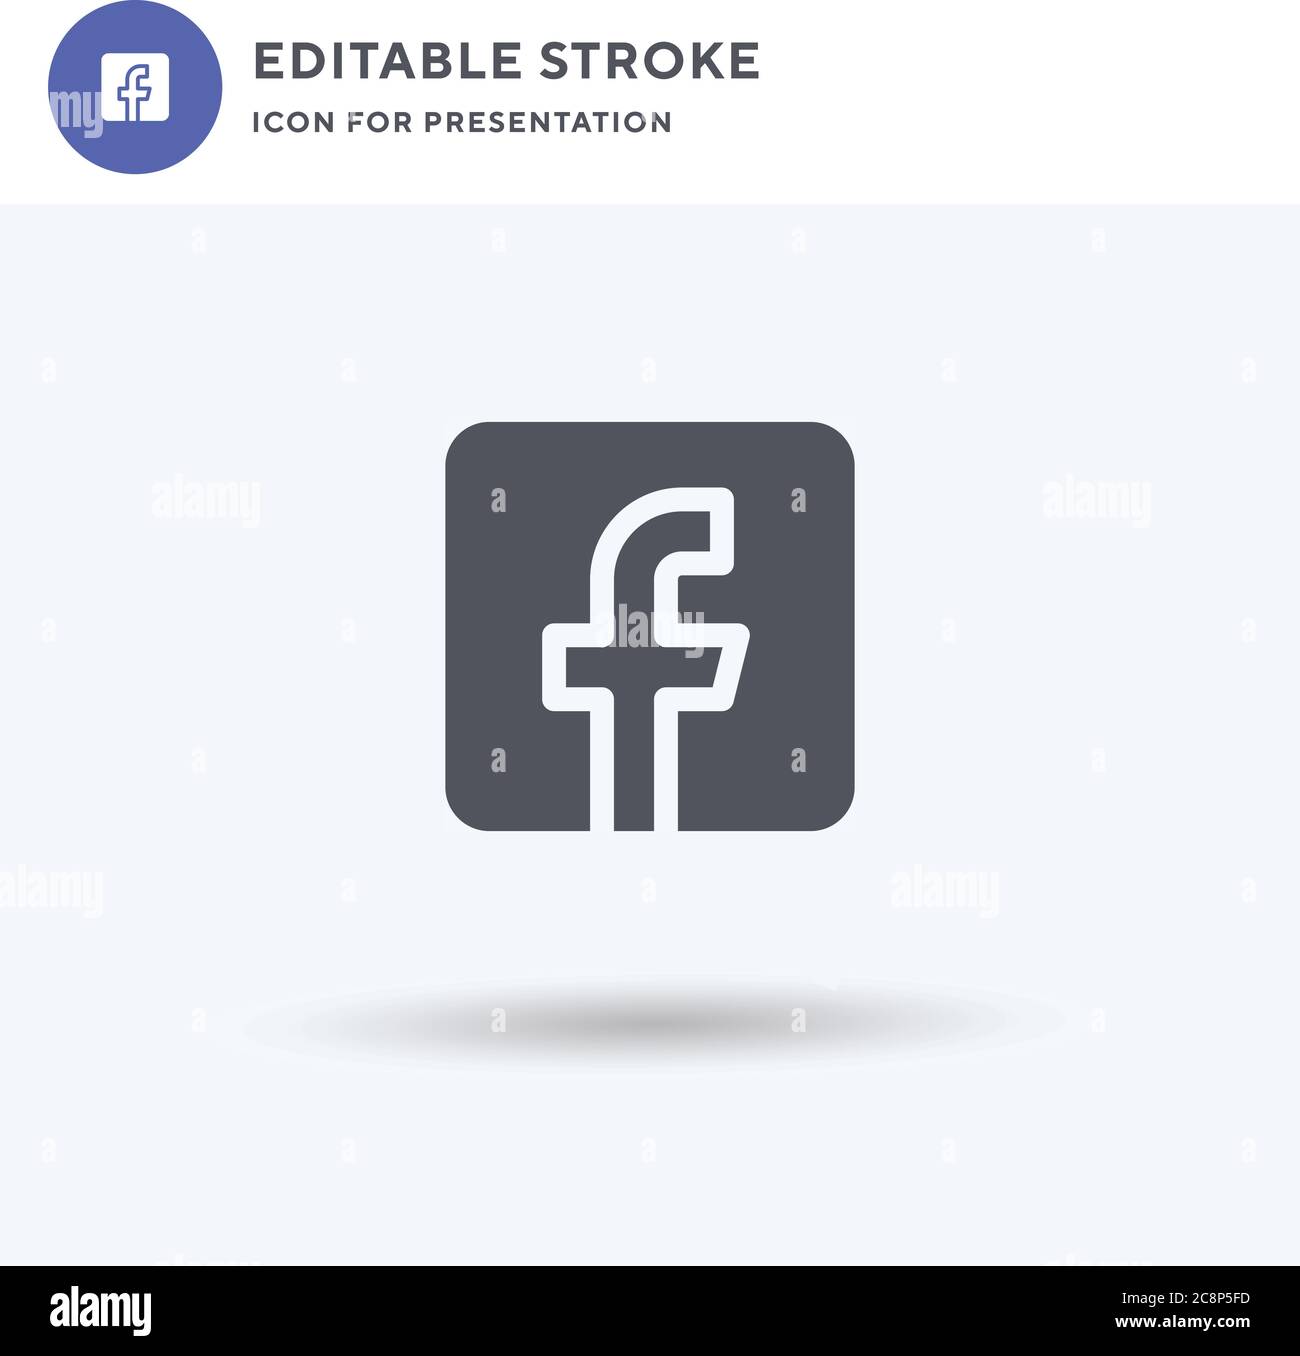 Facebook Icon Vector Filled Flat Sign Solid Pictogram Isolated On White Logo Illustration Facebook Icon For Presentation Stock Vector Image Art Alamy